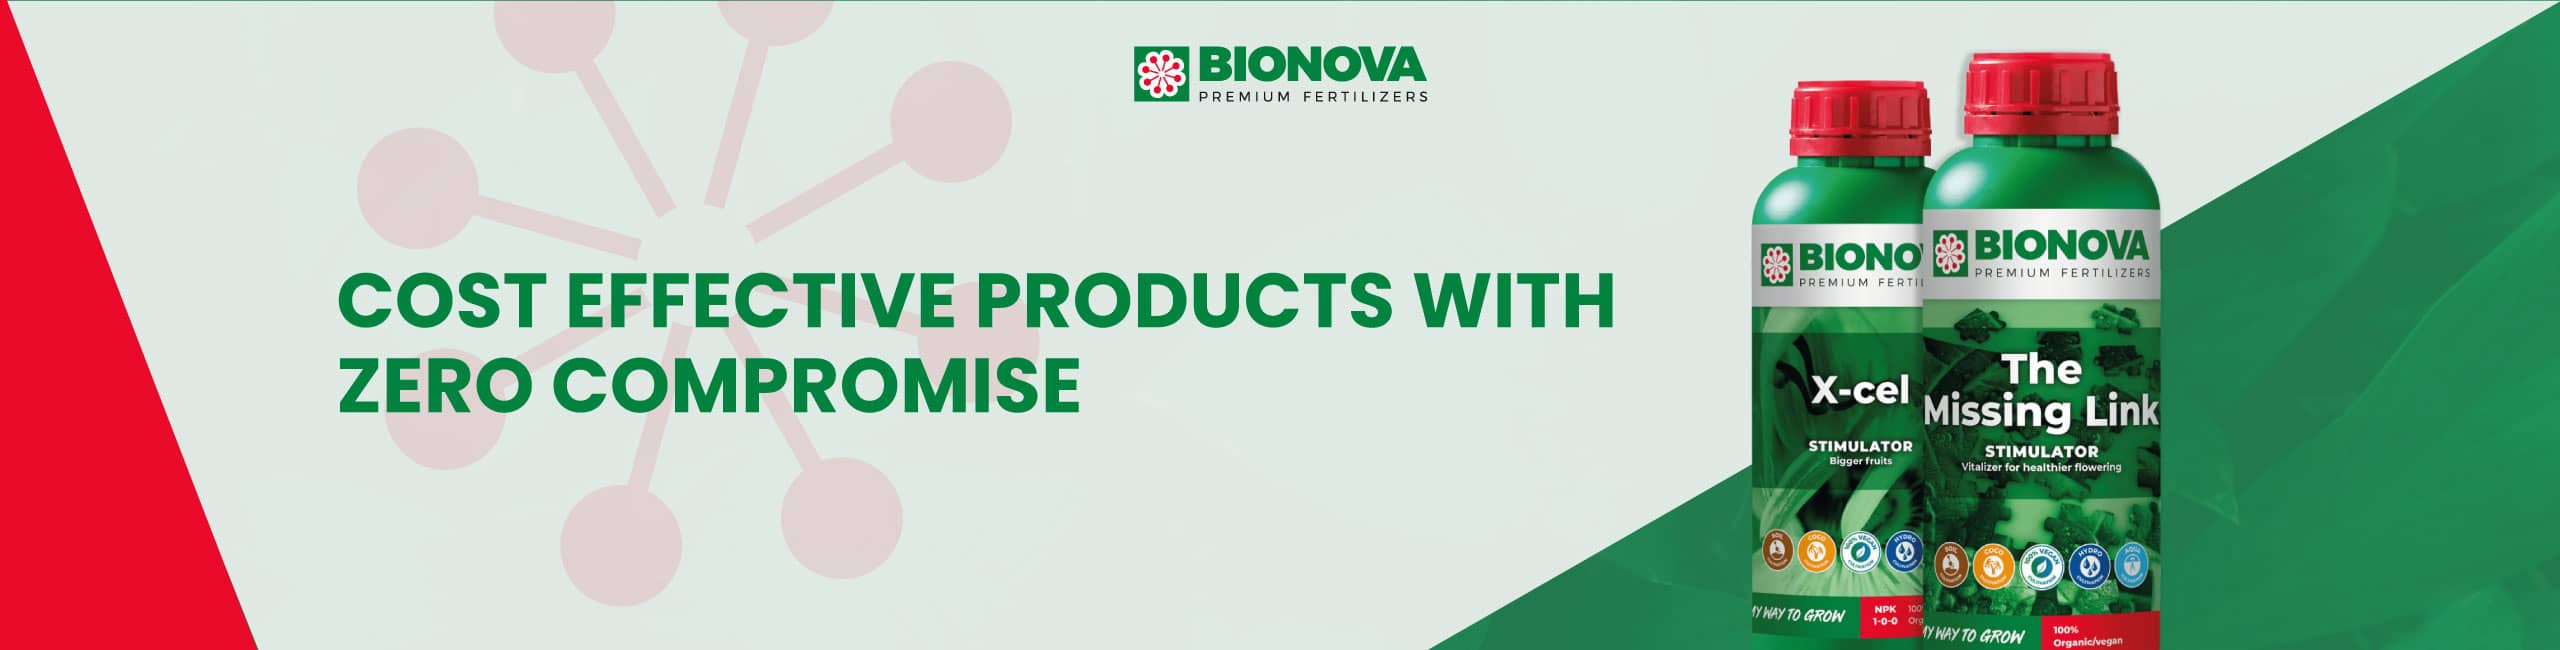 Bionova Cost Effective Products with Zero Compromise